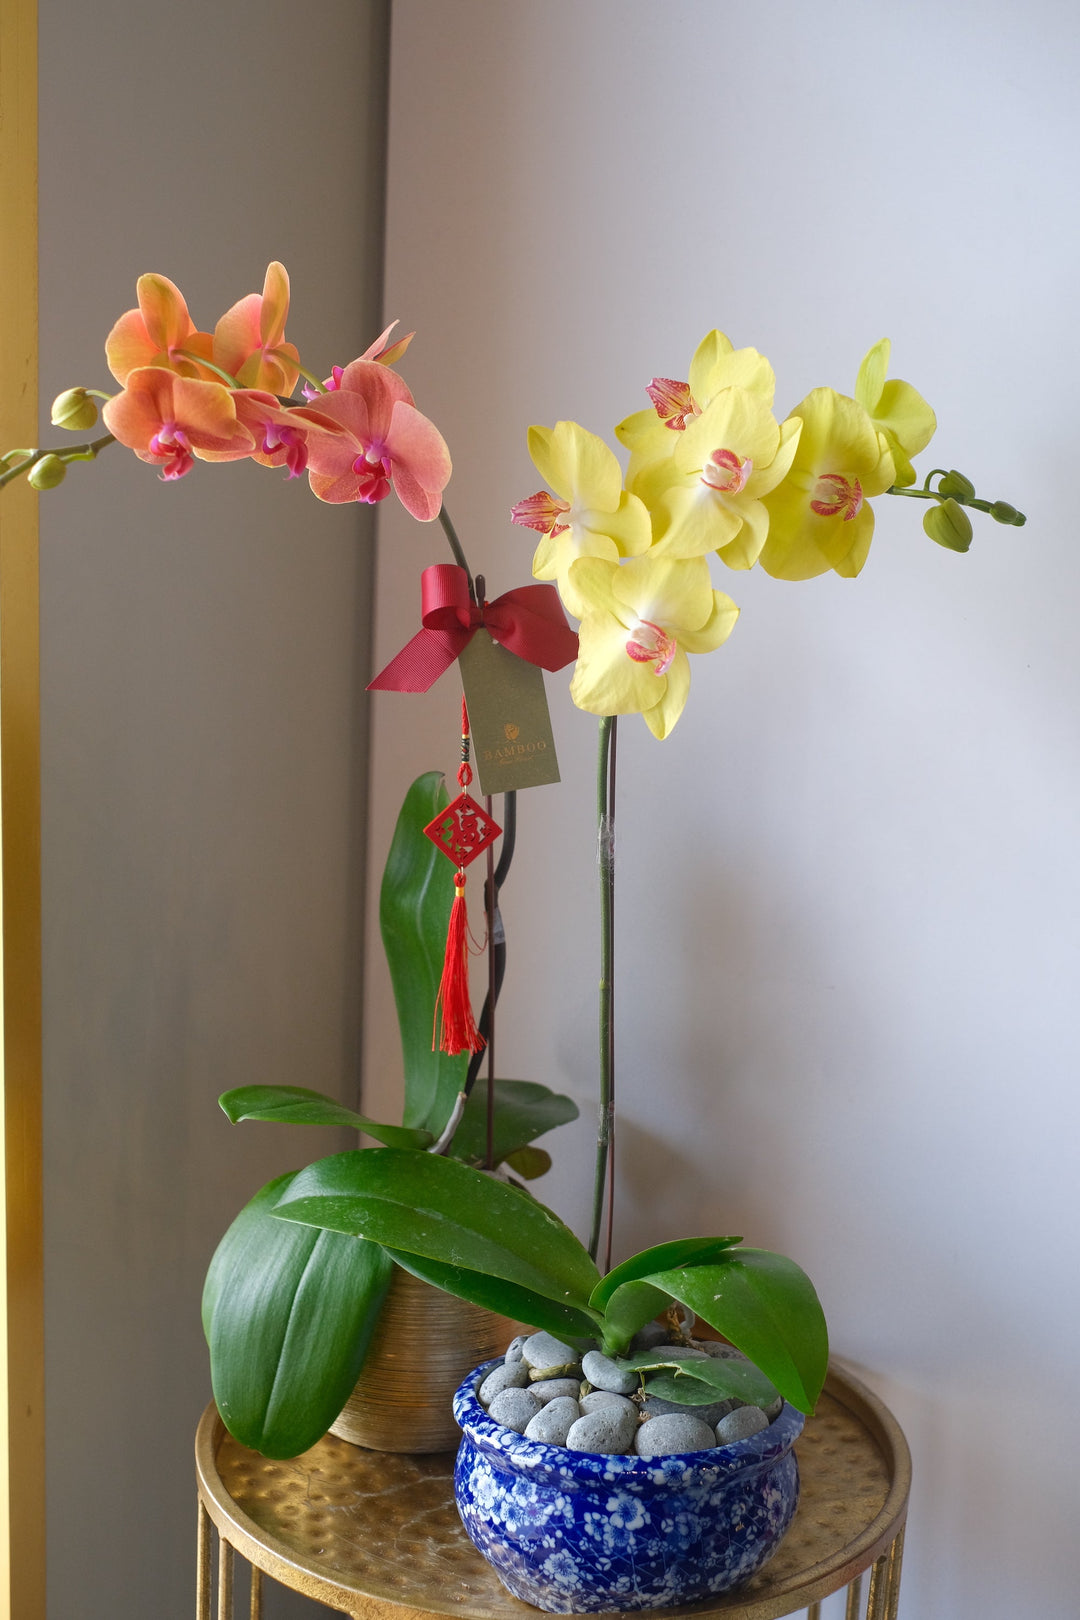 The Yellow Phalaenopsis Orchid: A Stunning Addition to Your Home